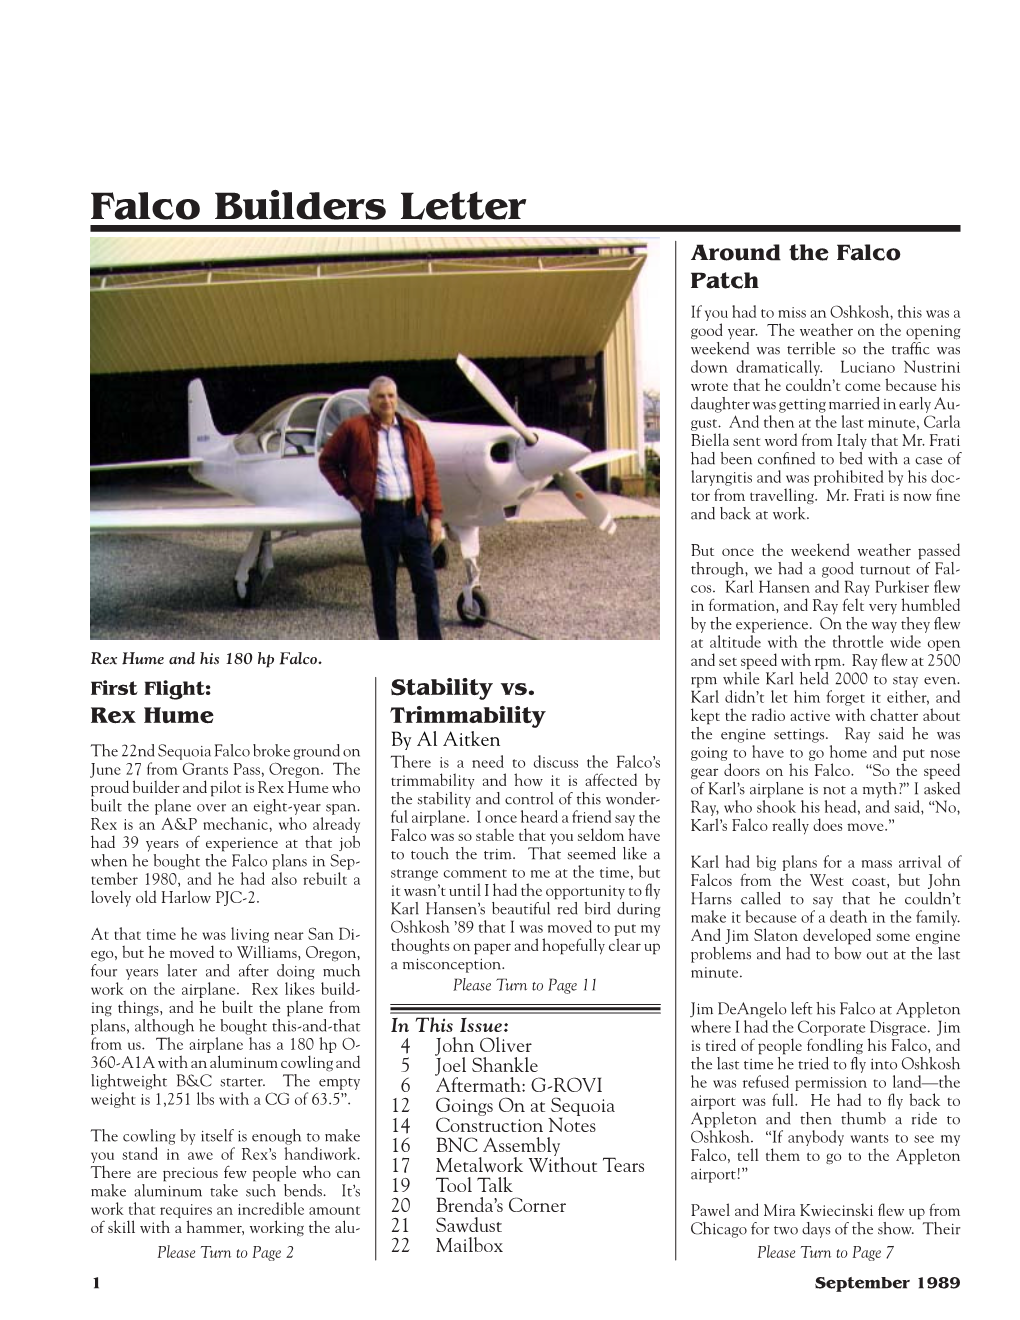 Falco Builders Letter Around the Falco Patch If You Had to Miss an Oshkosh, This Was a Good Year